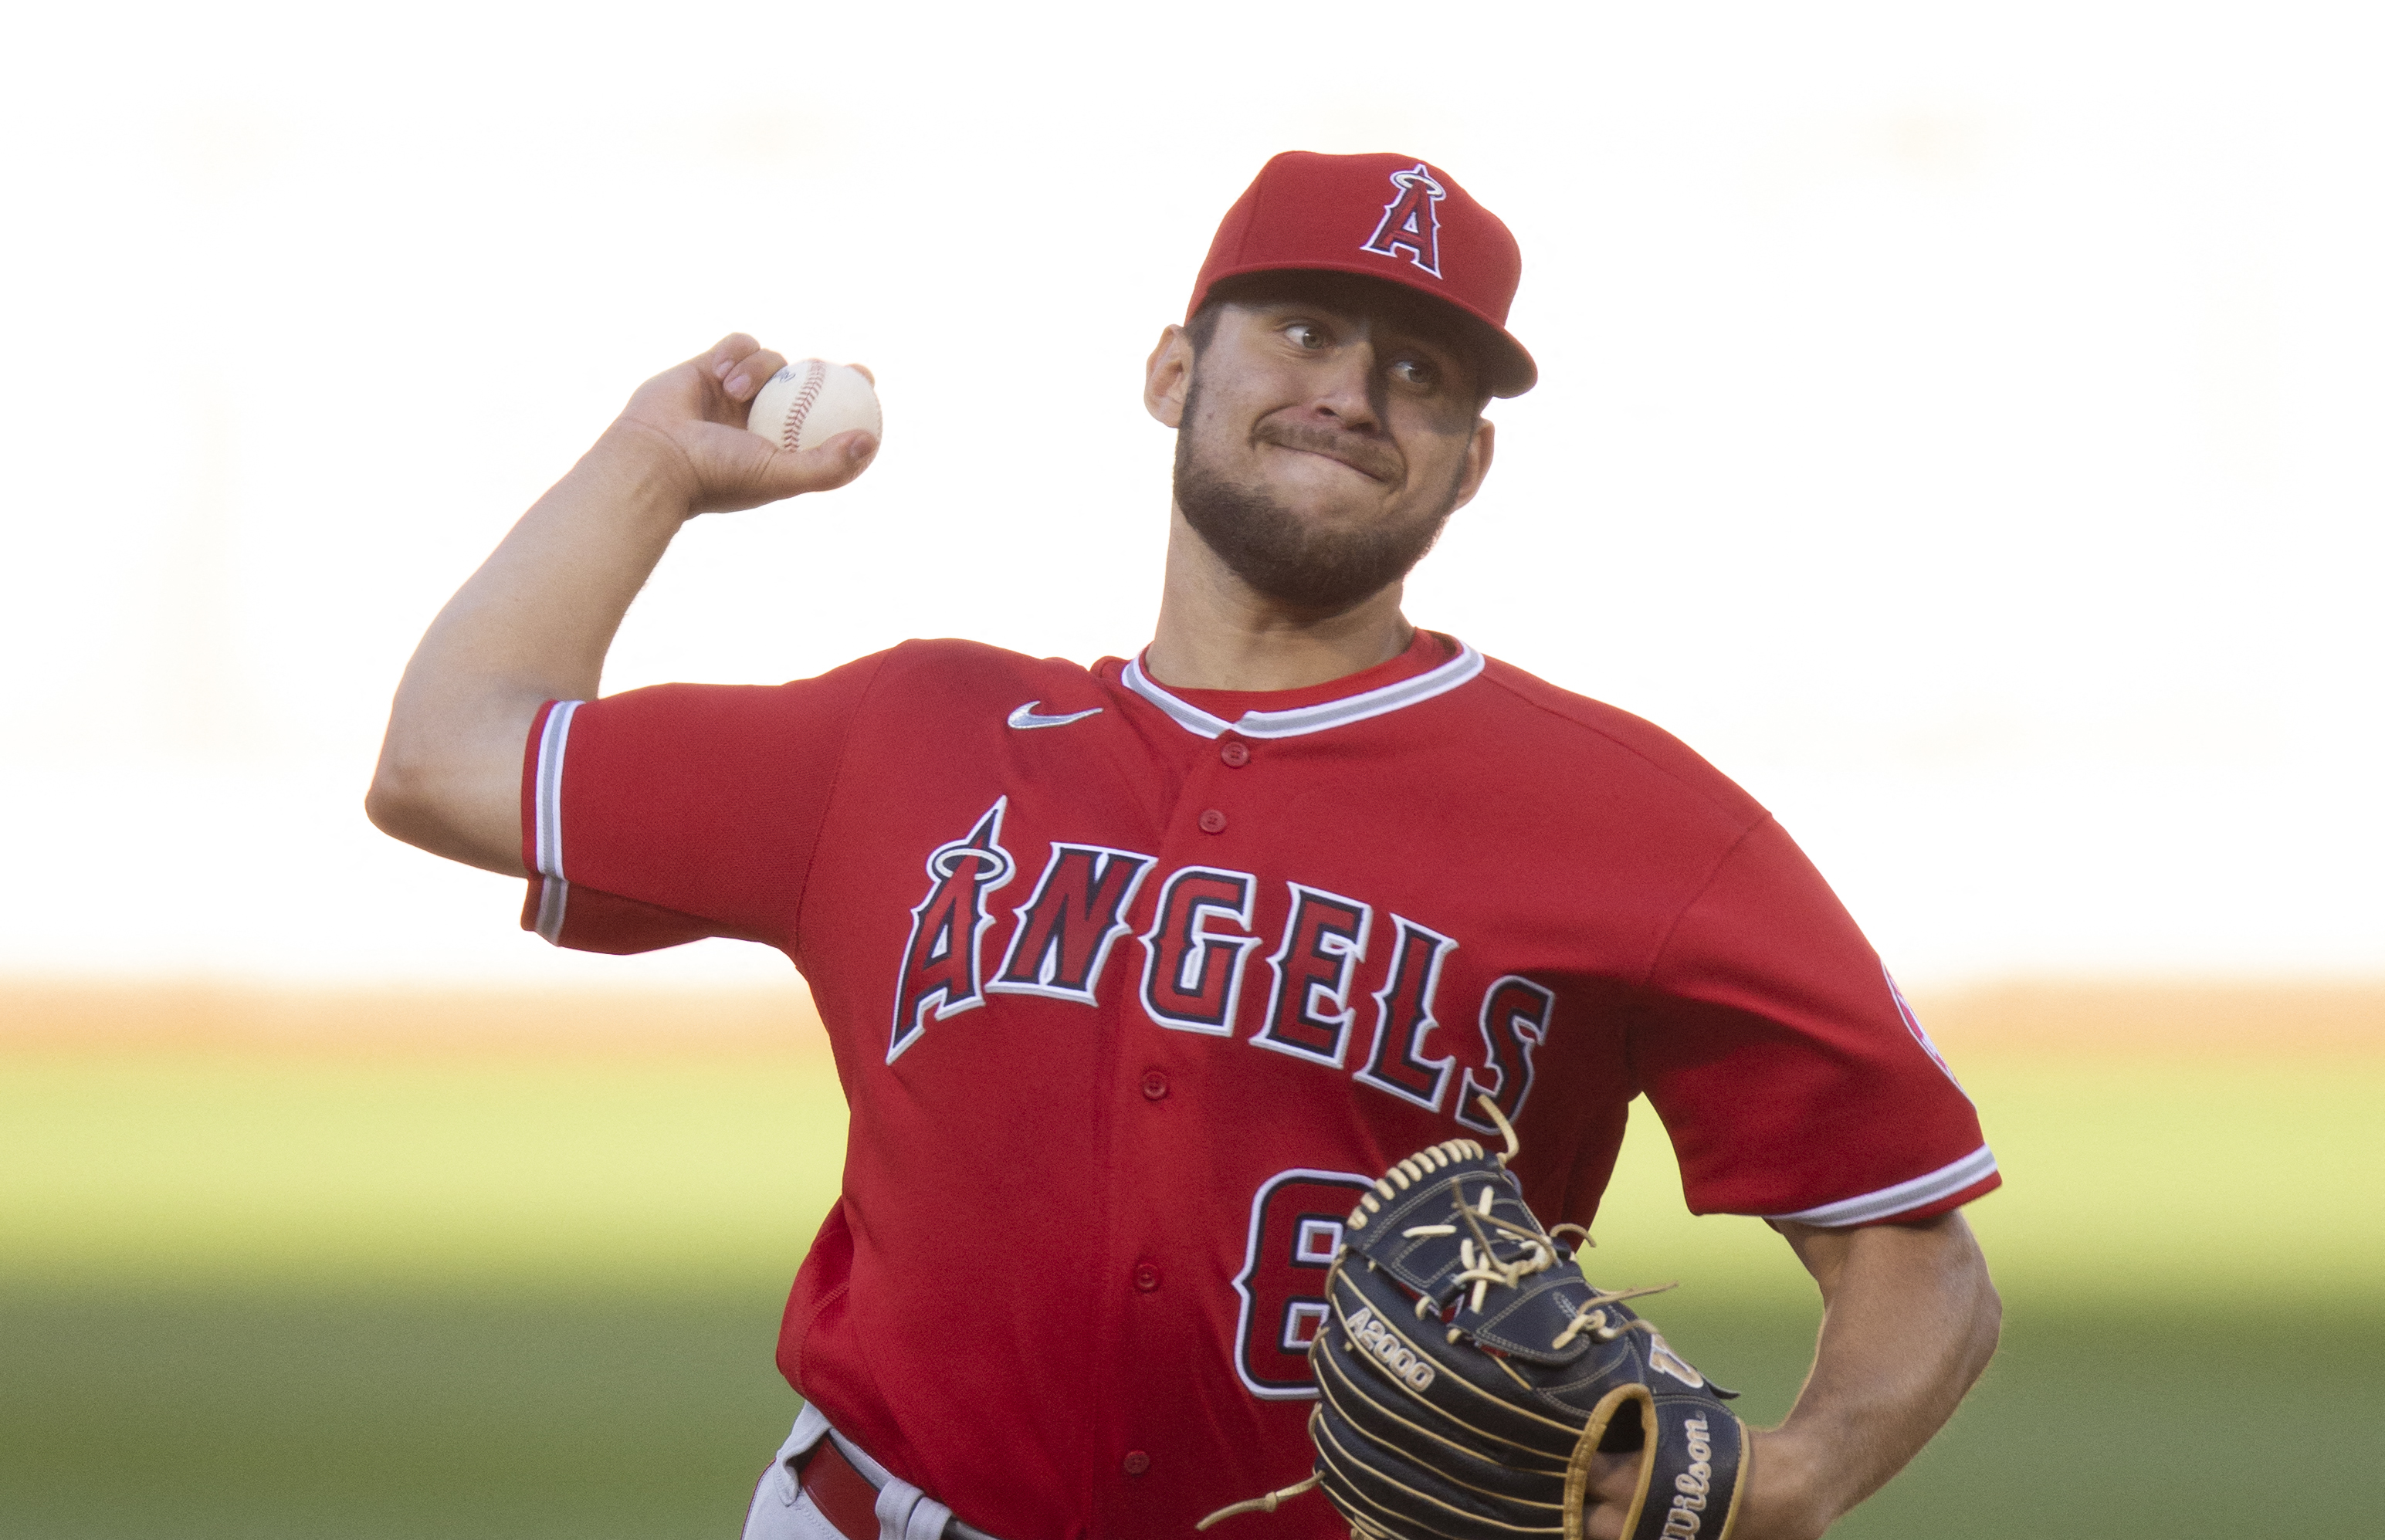 Cubs vs Angels live stream TV channel how to watch